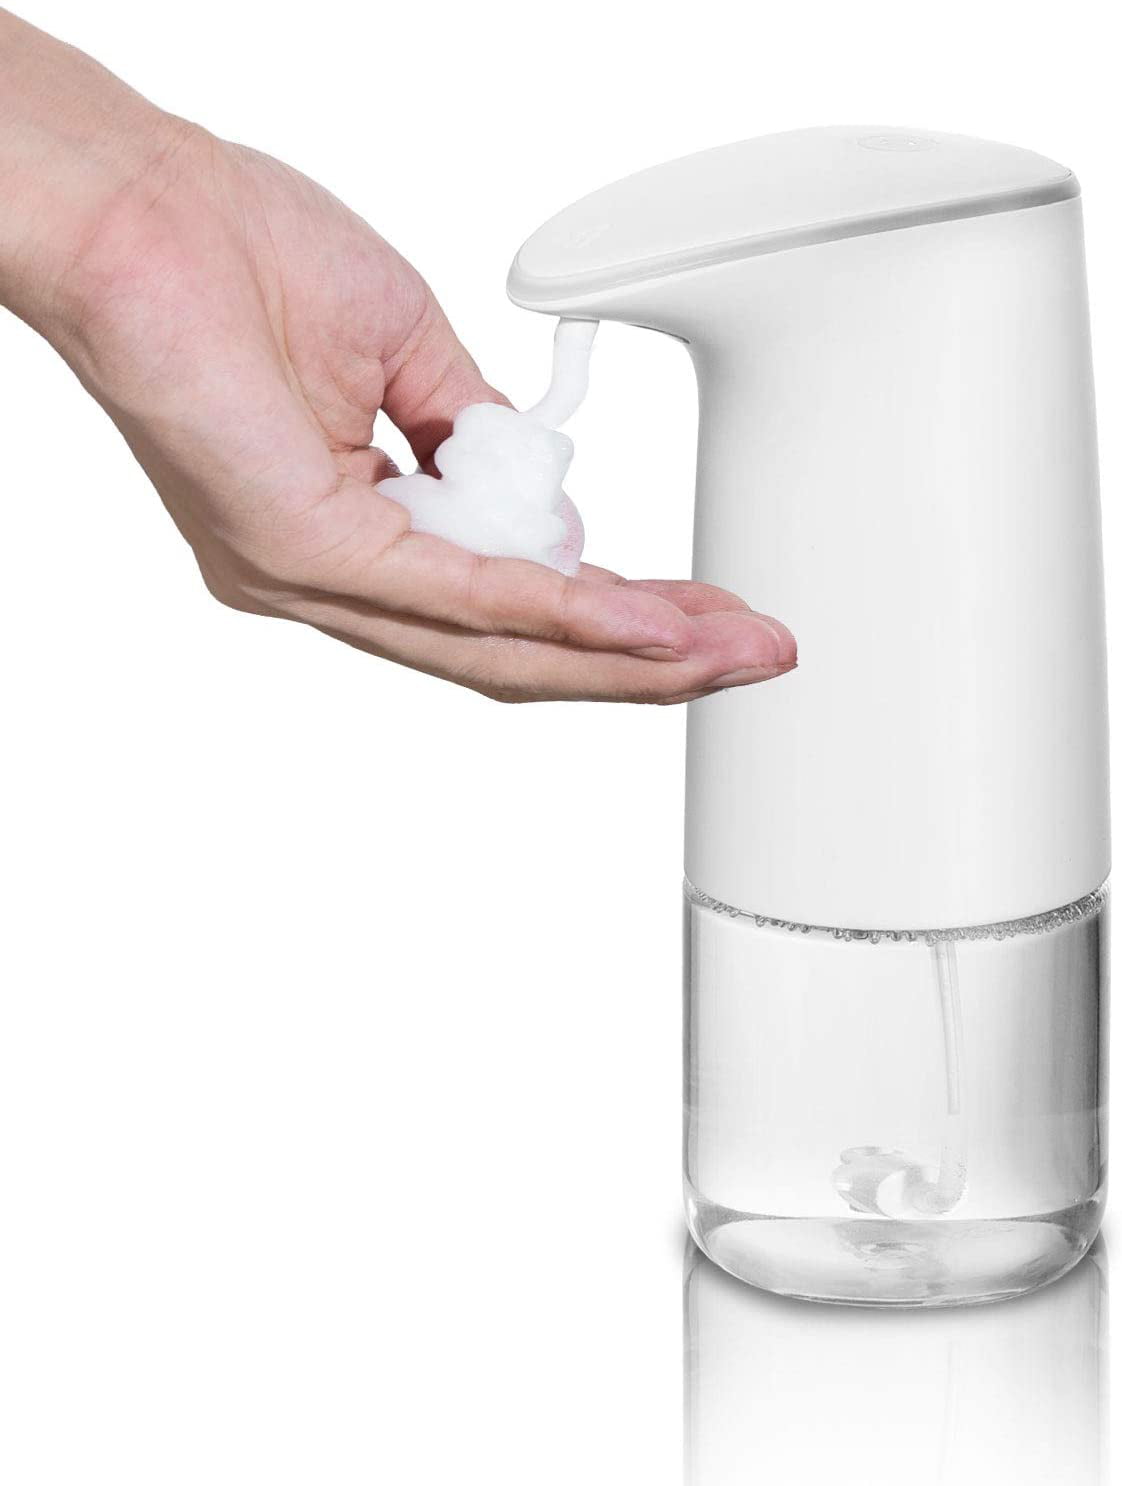 Details about   400ml Automatic Soap Dispenser Intelligent Sensor Touchless Hand cleaning 